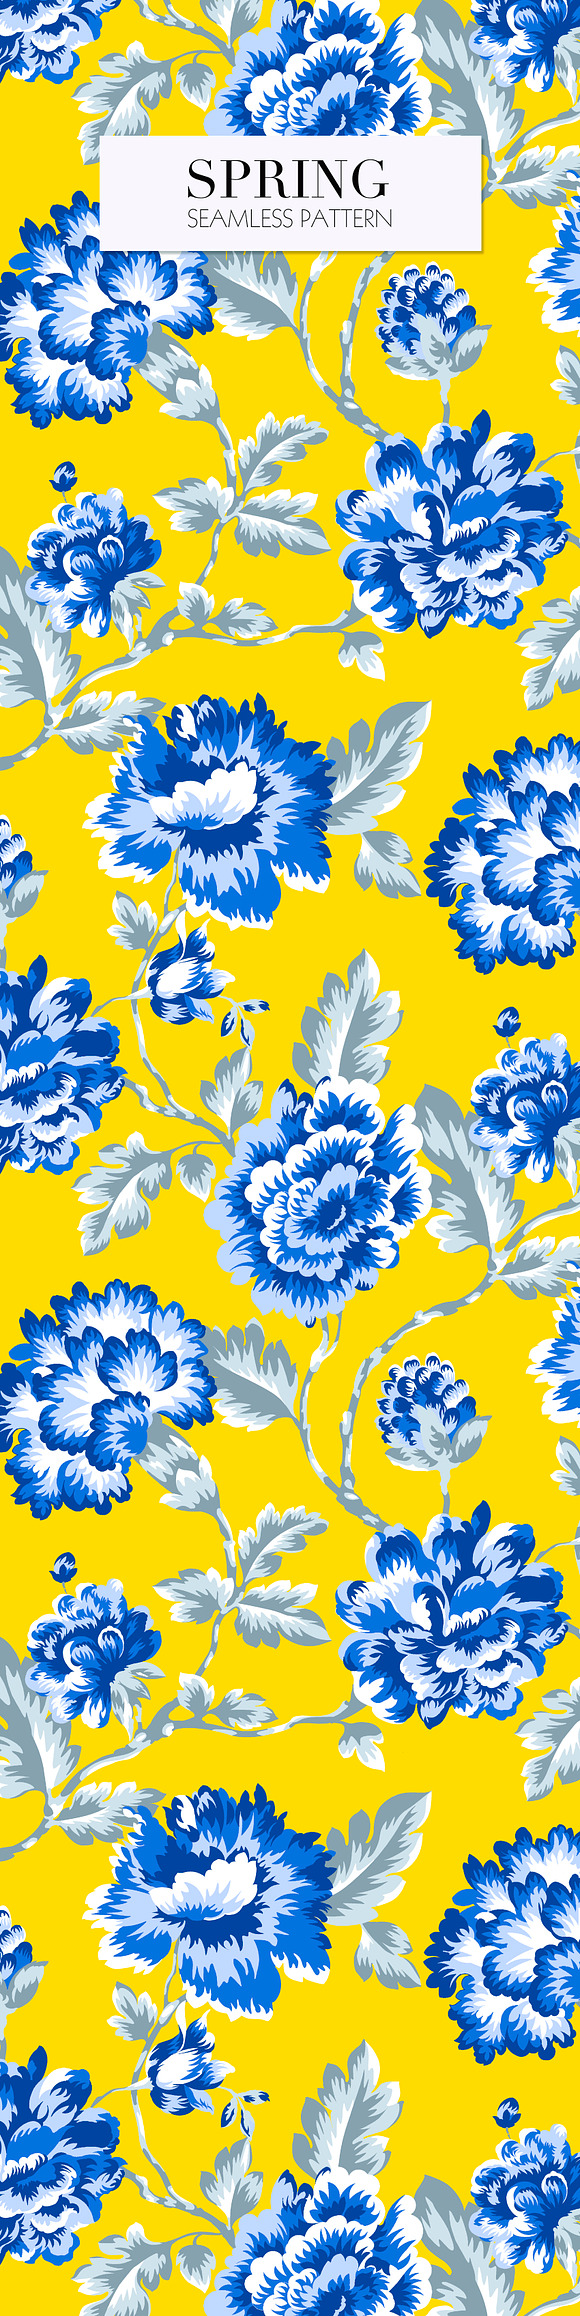 Spring Floral Pattern in Illustrations - product preview 7